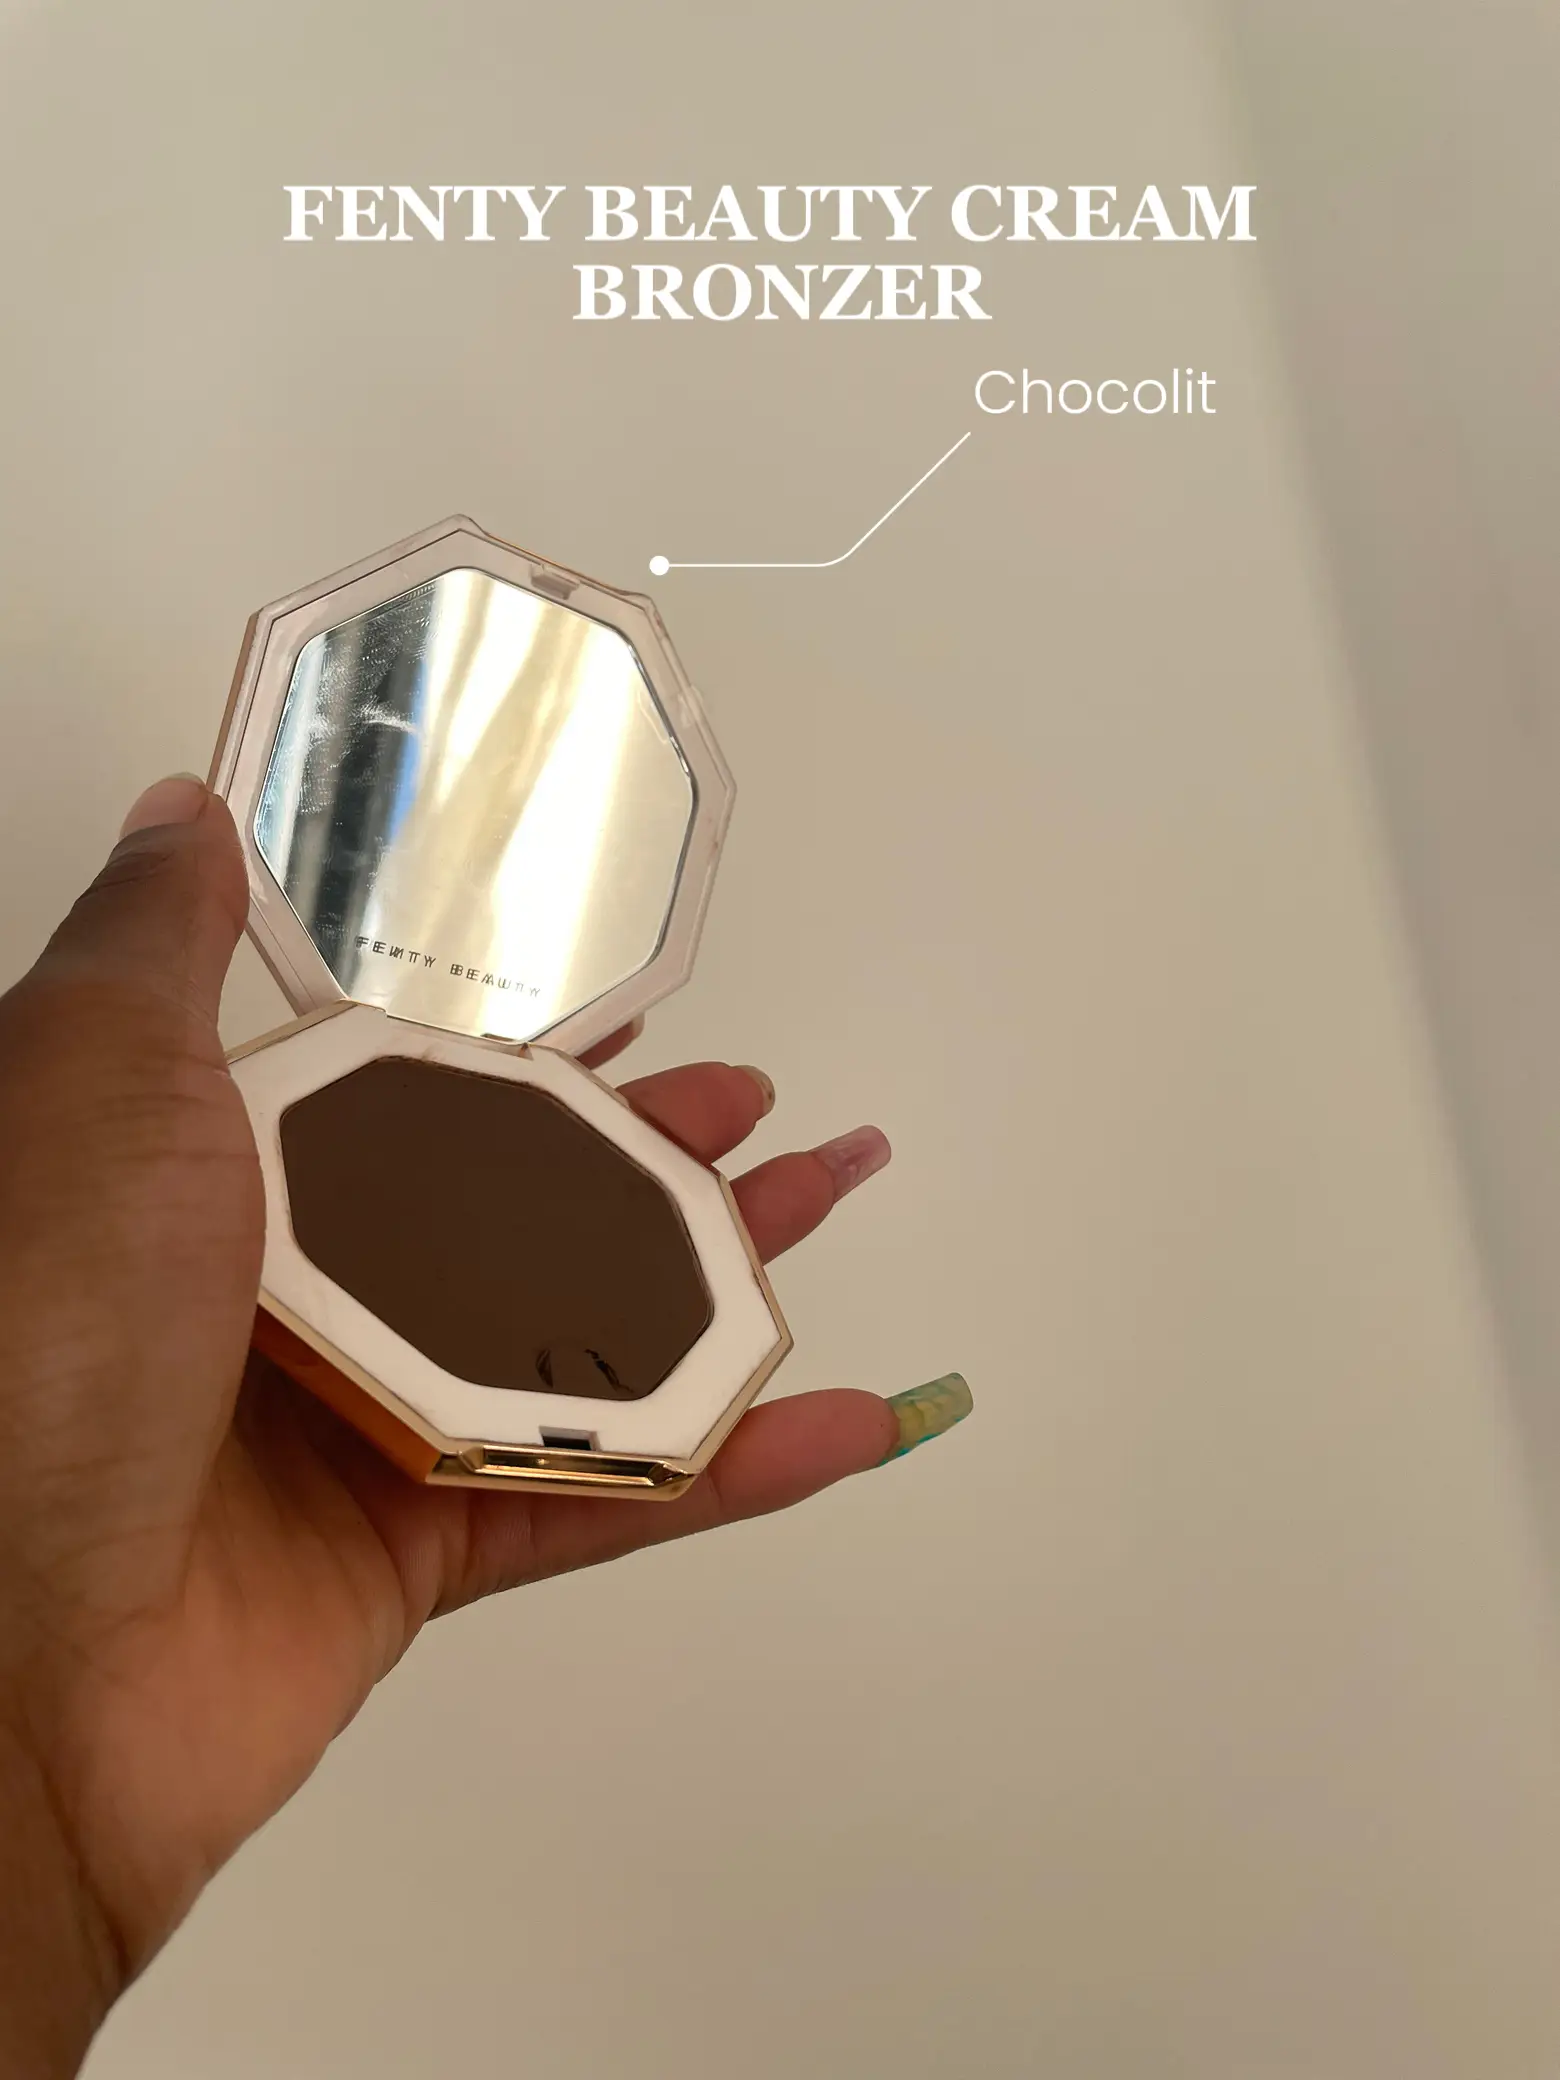 12 Best Bronzers for Every Skin Tone in 2021, According to Top